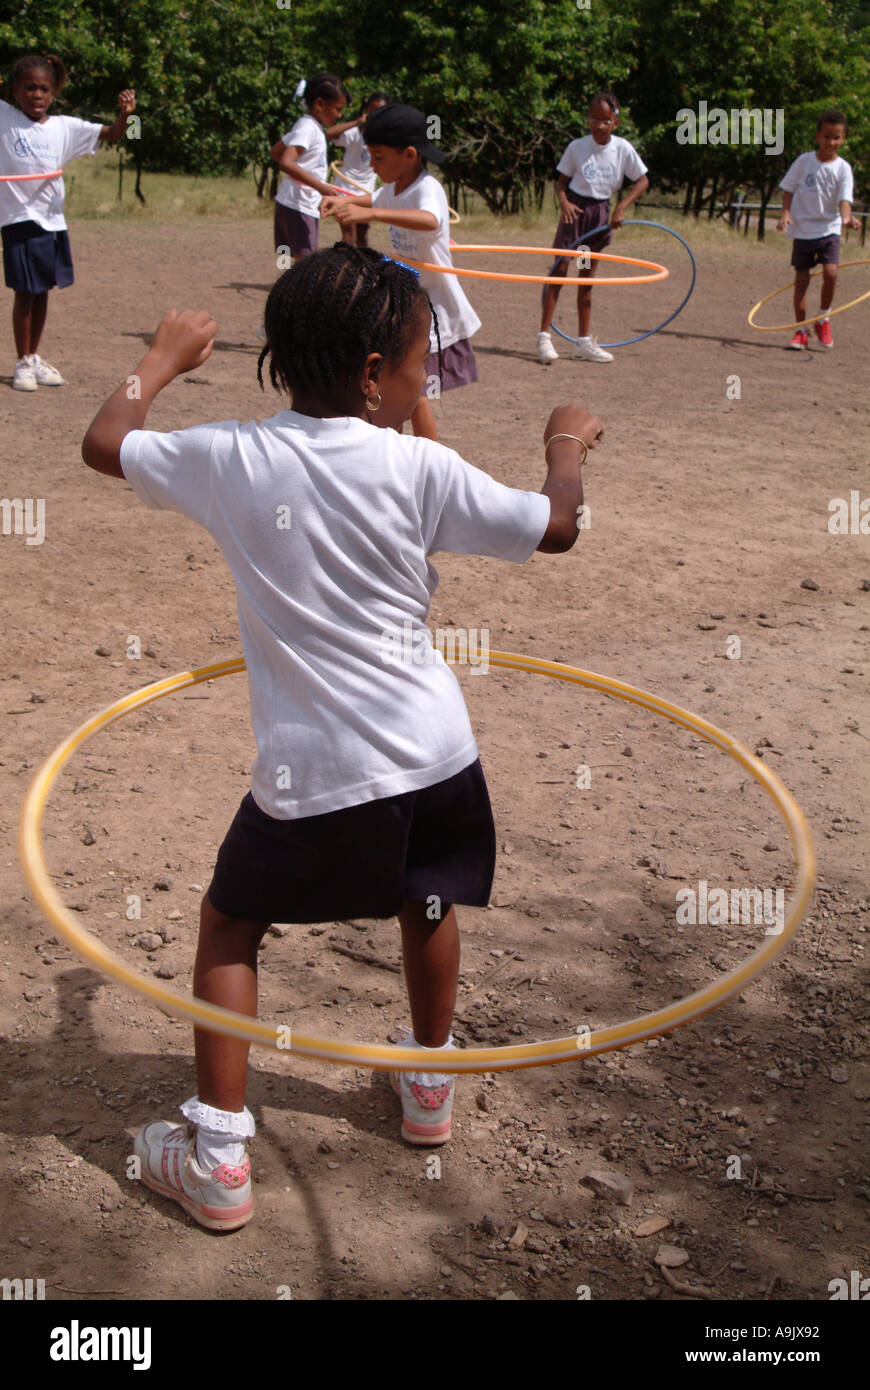 Children playing outside with plastic hula hoops Stock Photo